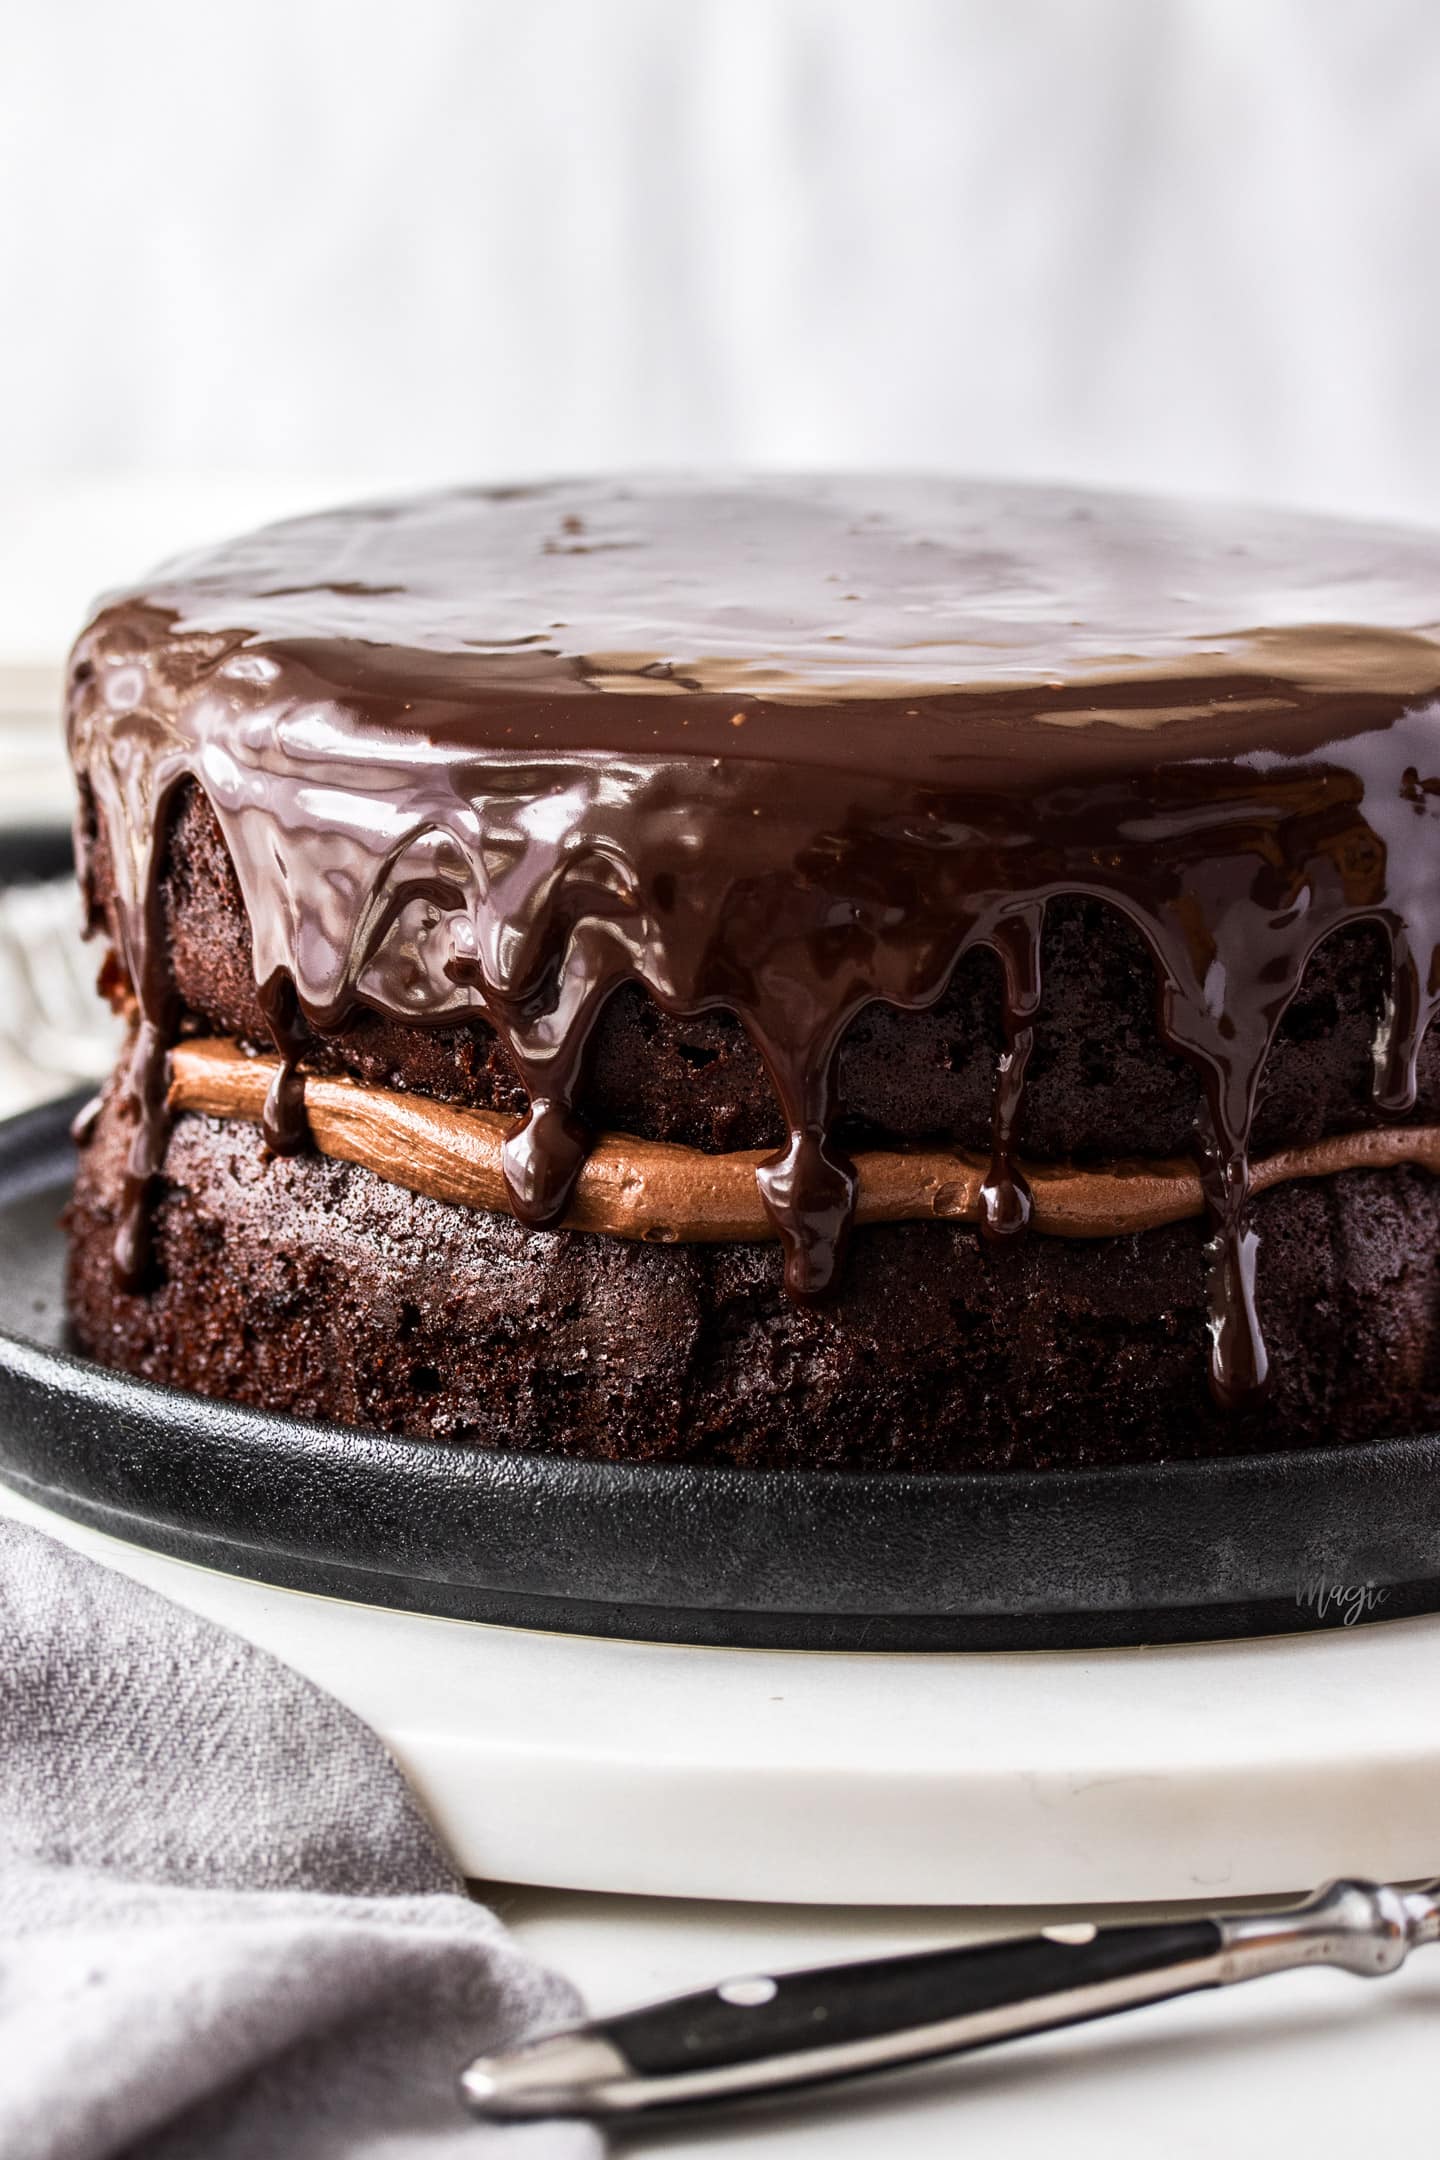 A chocolate cake topped with ganache on a marble platter.